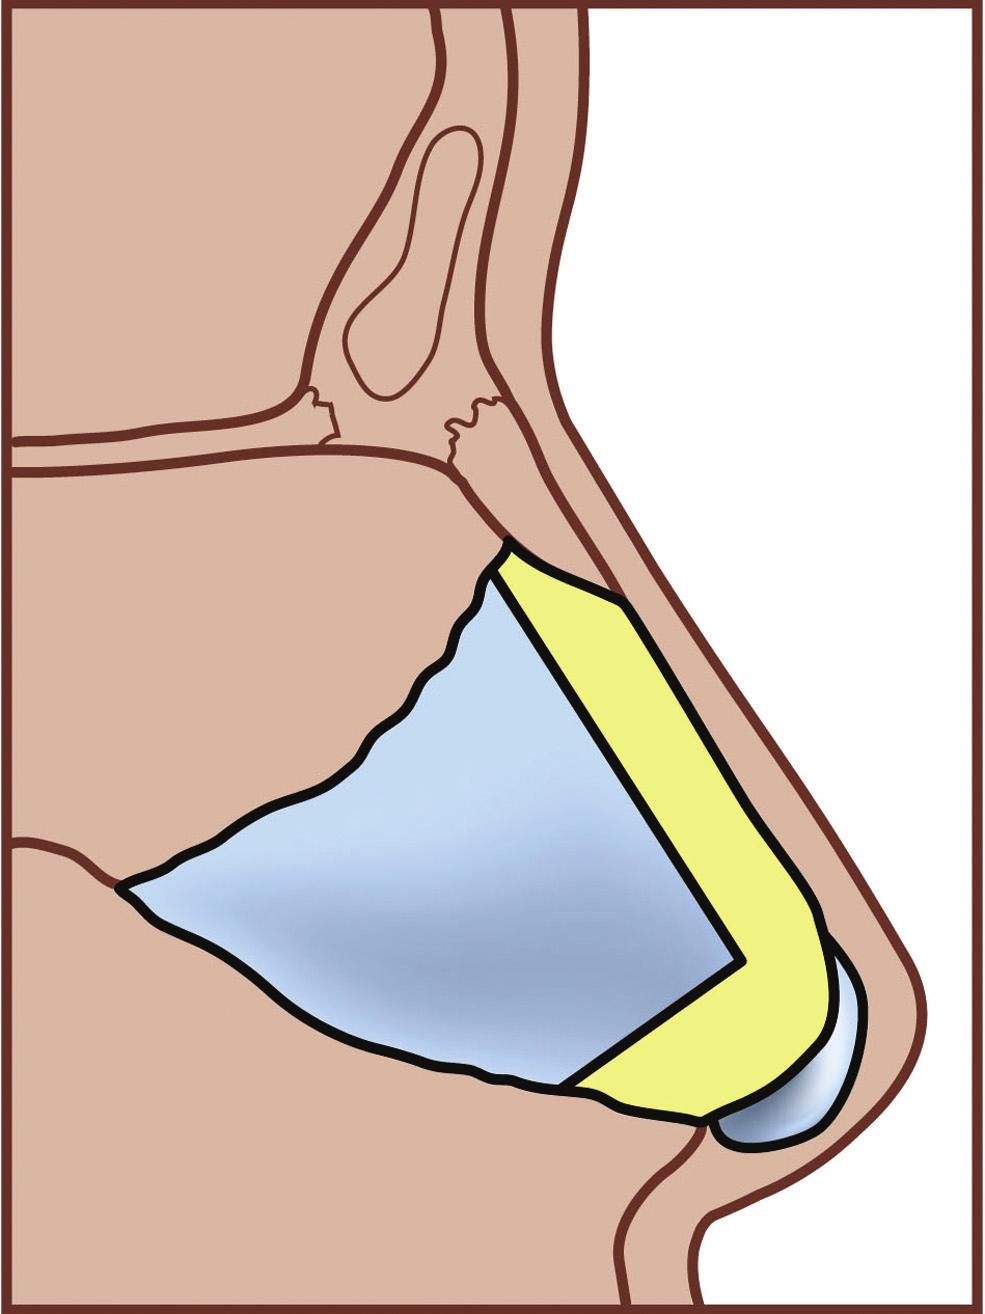 This poorly understood vasoerectile structure has been localized to the region anterior to the middle turbinate, above the nasal floor, and caudally approaching the nasal valve region.